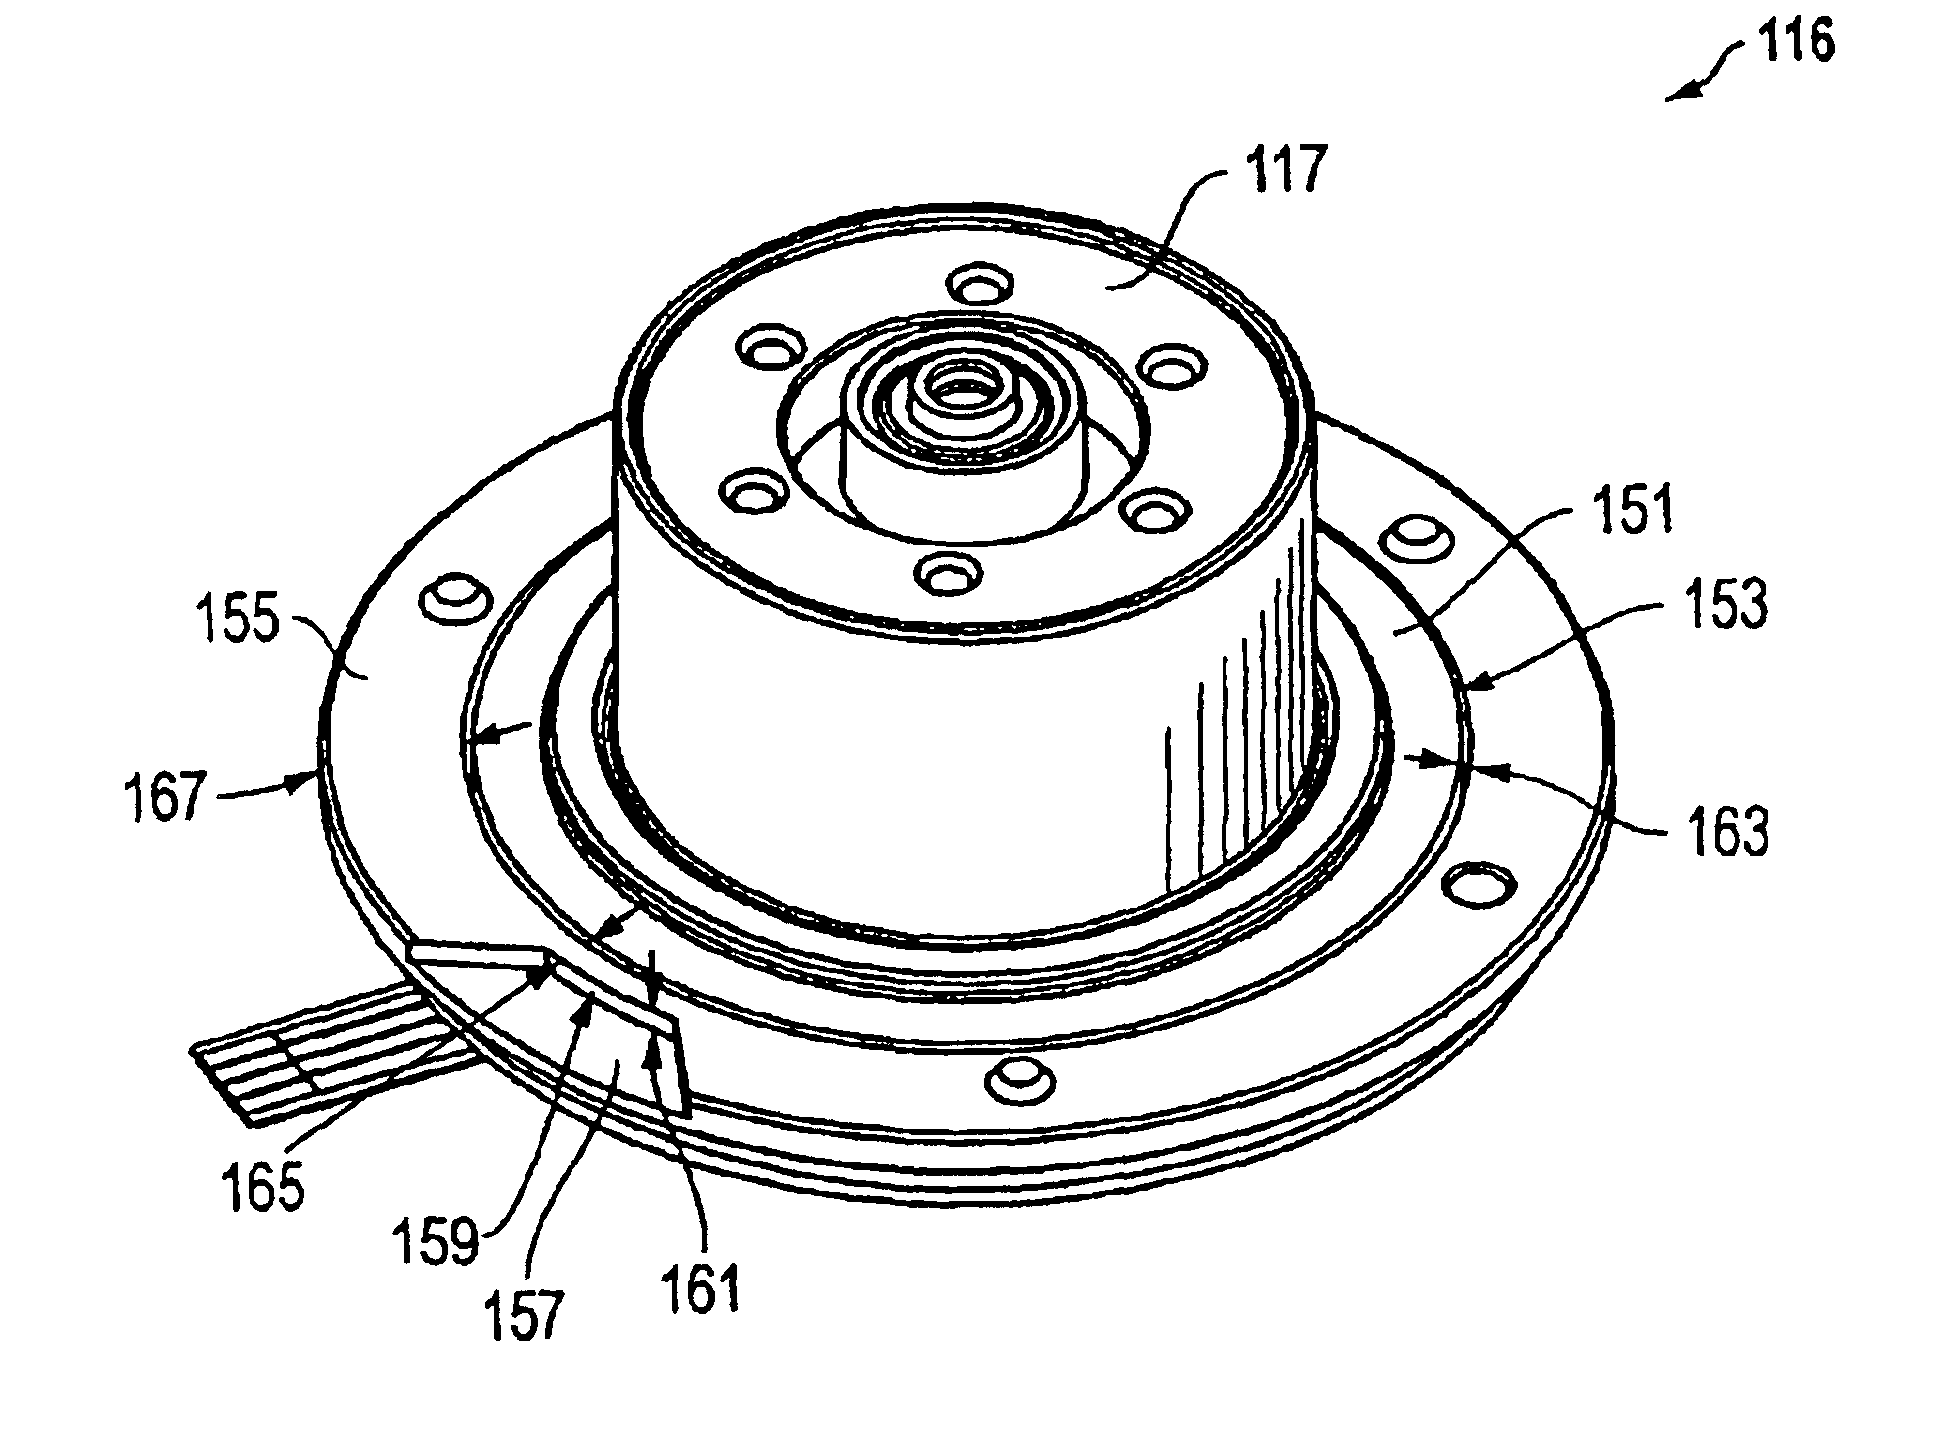 Method of attenuating airflow disturbances in a hard disk drive with a circumferential motor bracket shroud for motor hub flange outside diameter